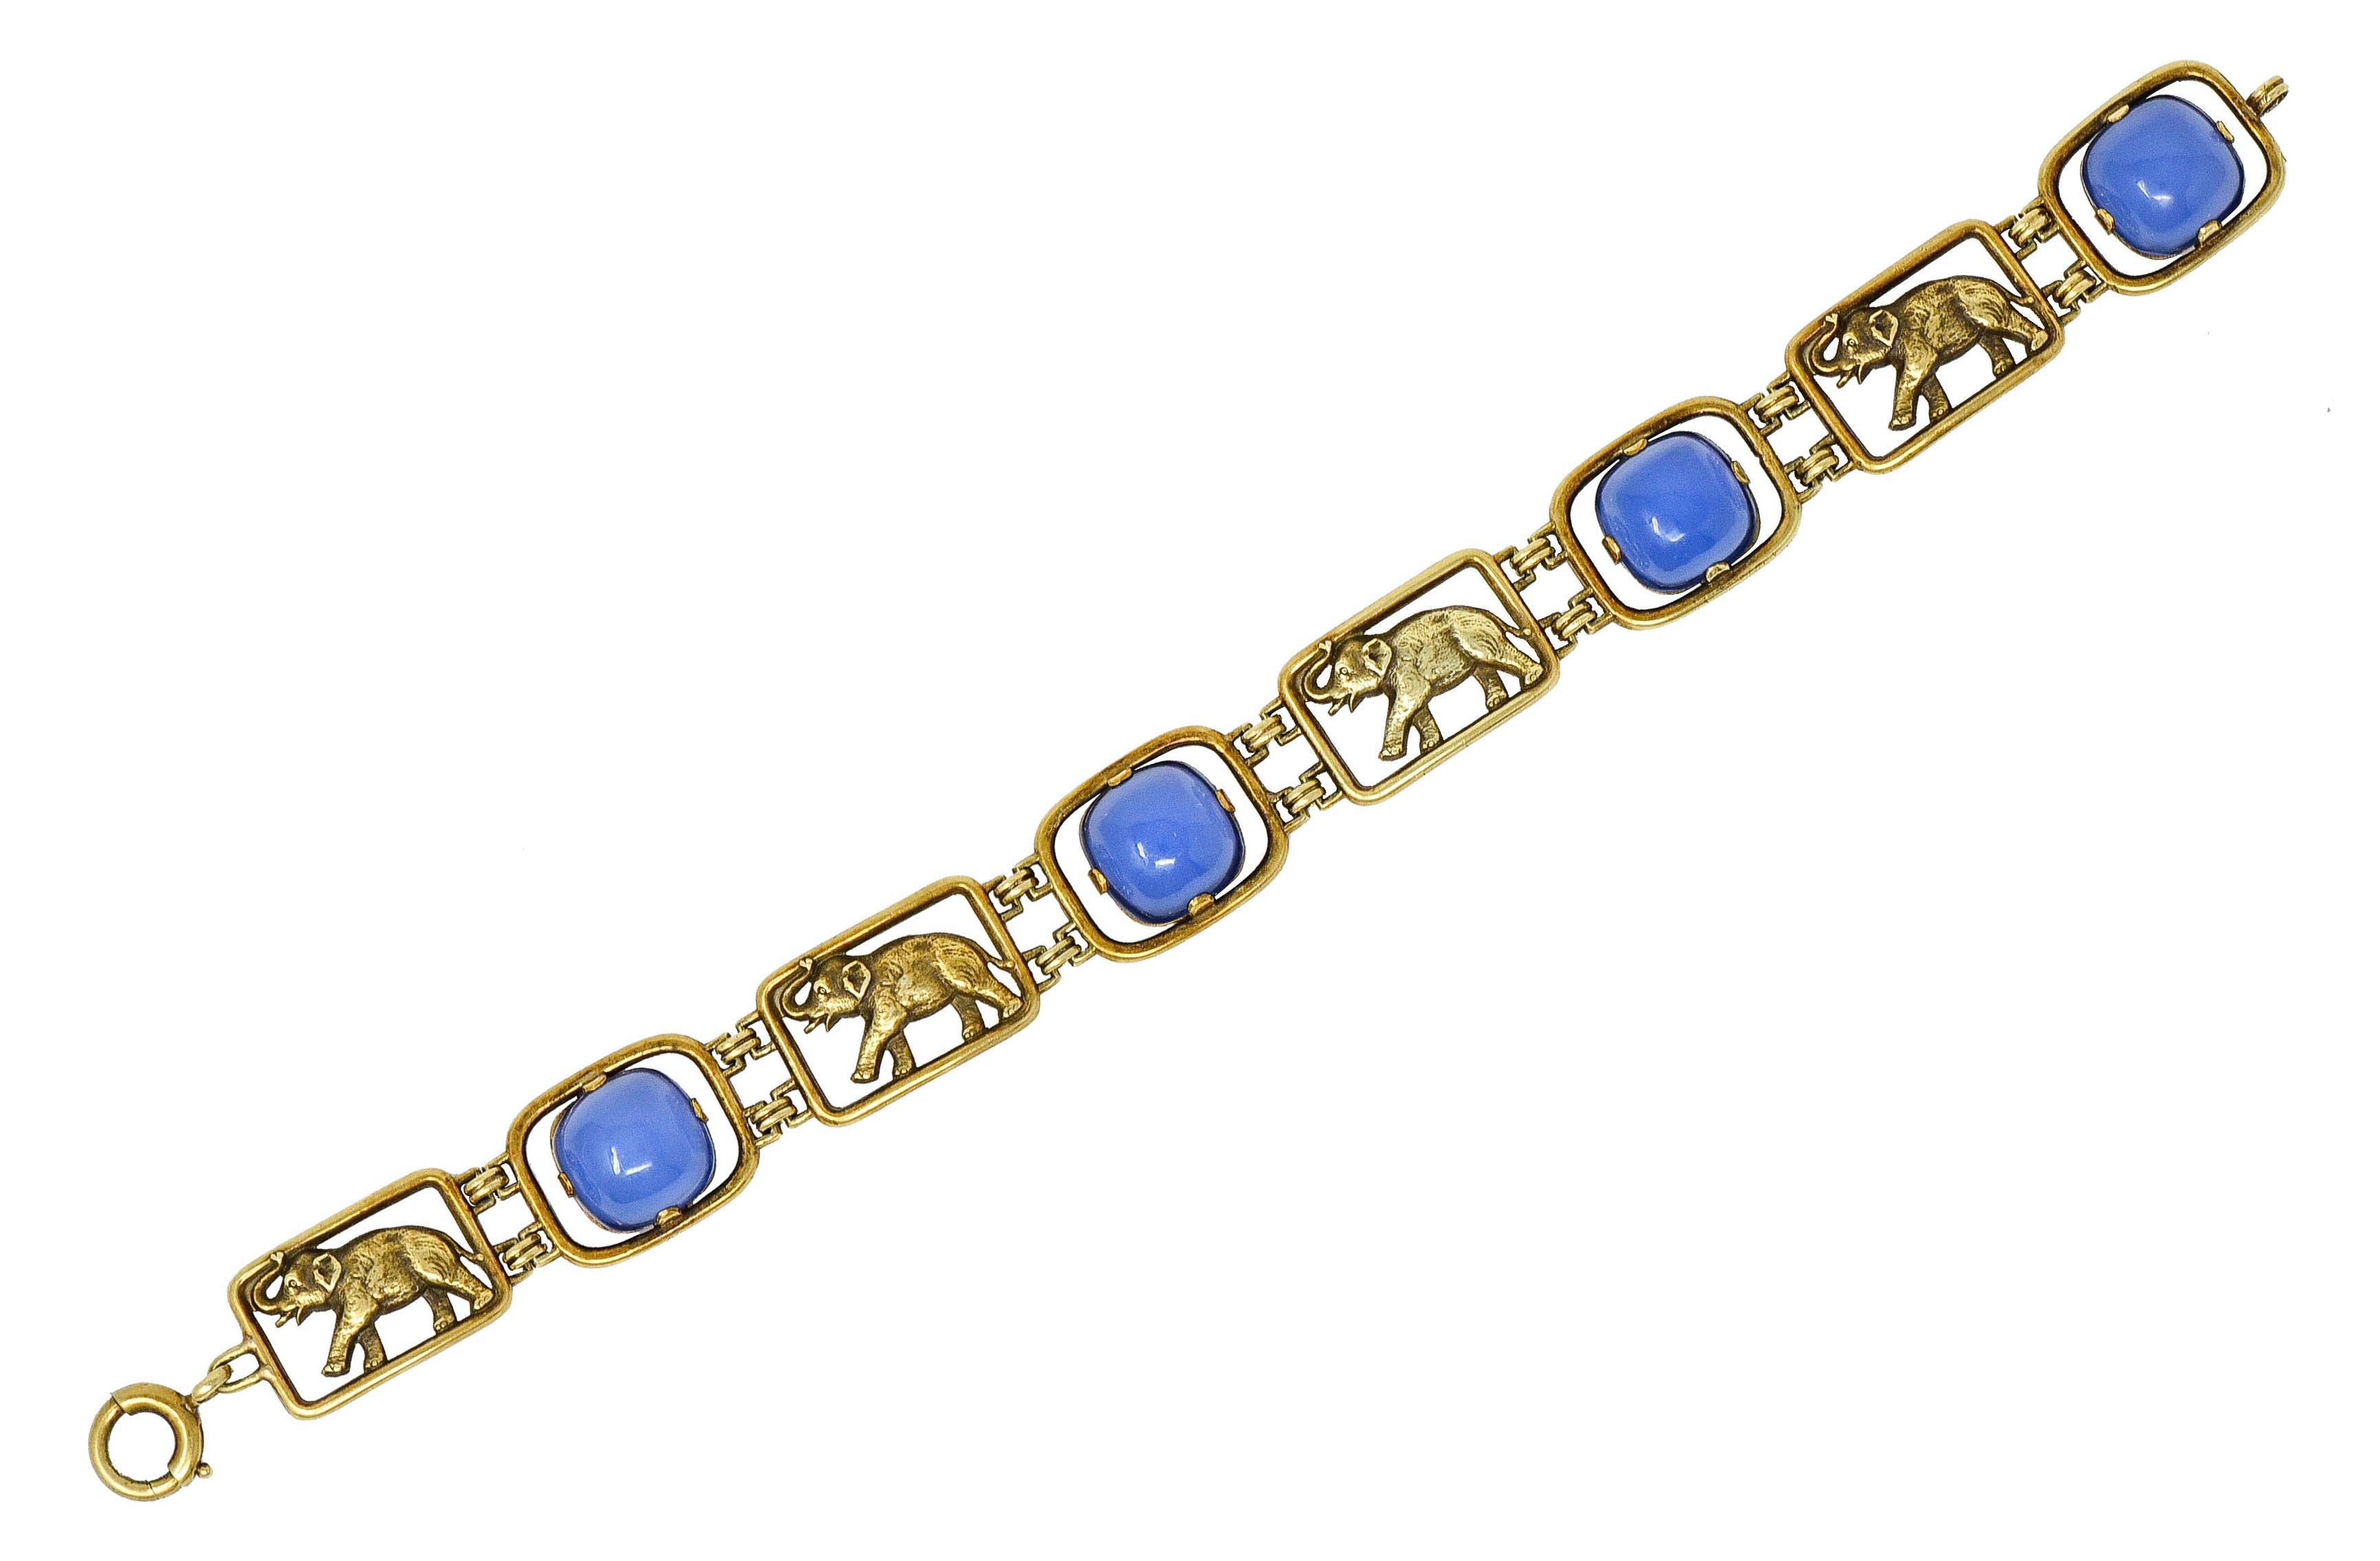 Bracelet features pierced rectangular links and completes as a spring ring clasp

Some links are highly rendered to depict elephants with an upturned trunk

Alternating with sugarloaf cushion cabochons of violetish-blue chrysoprase

Very